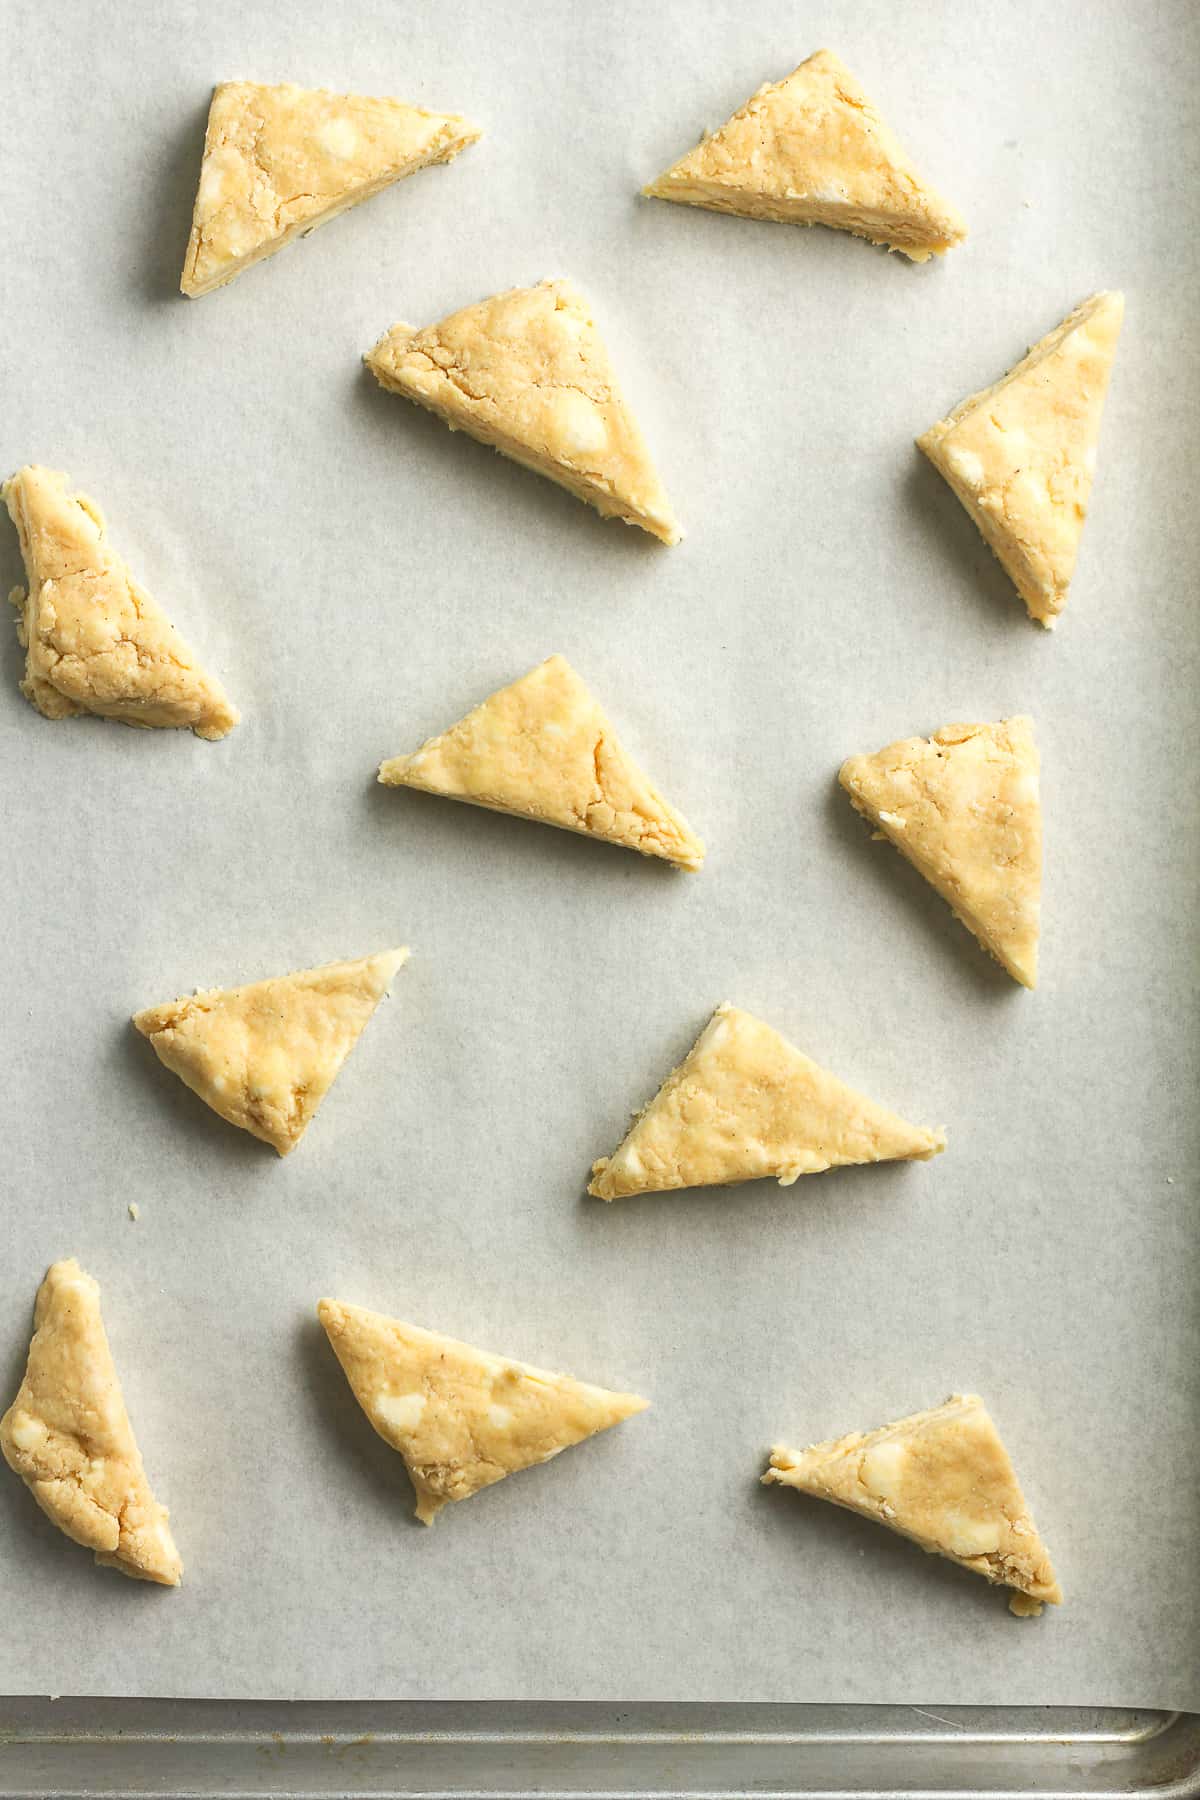 The scone triangles before baking.